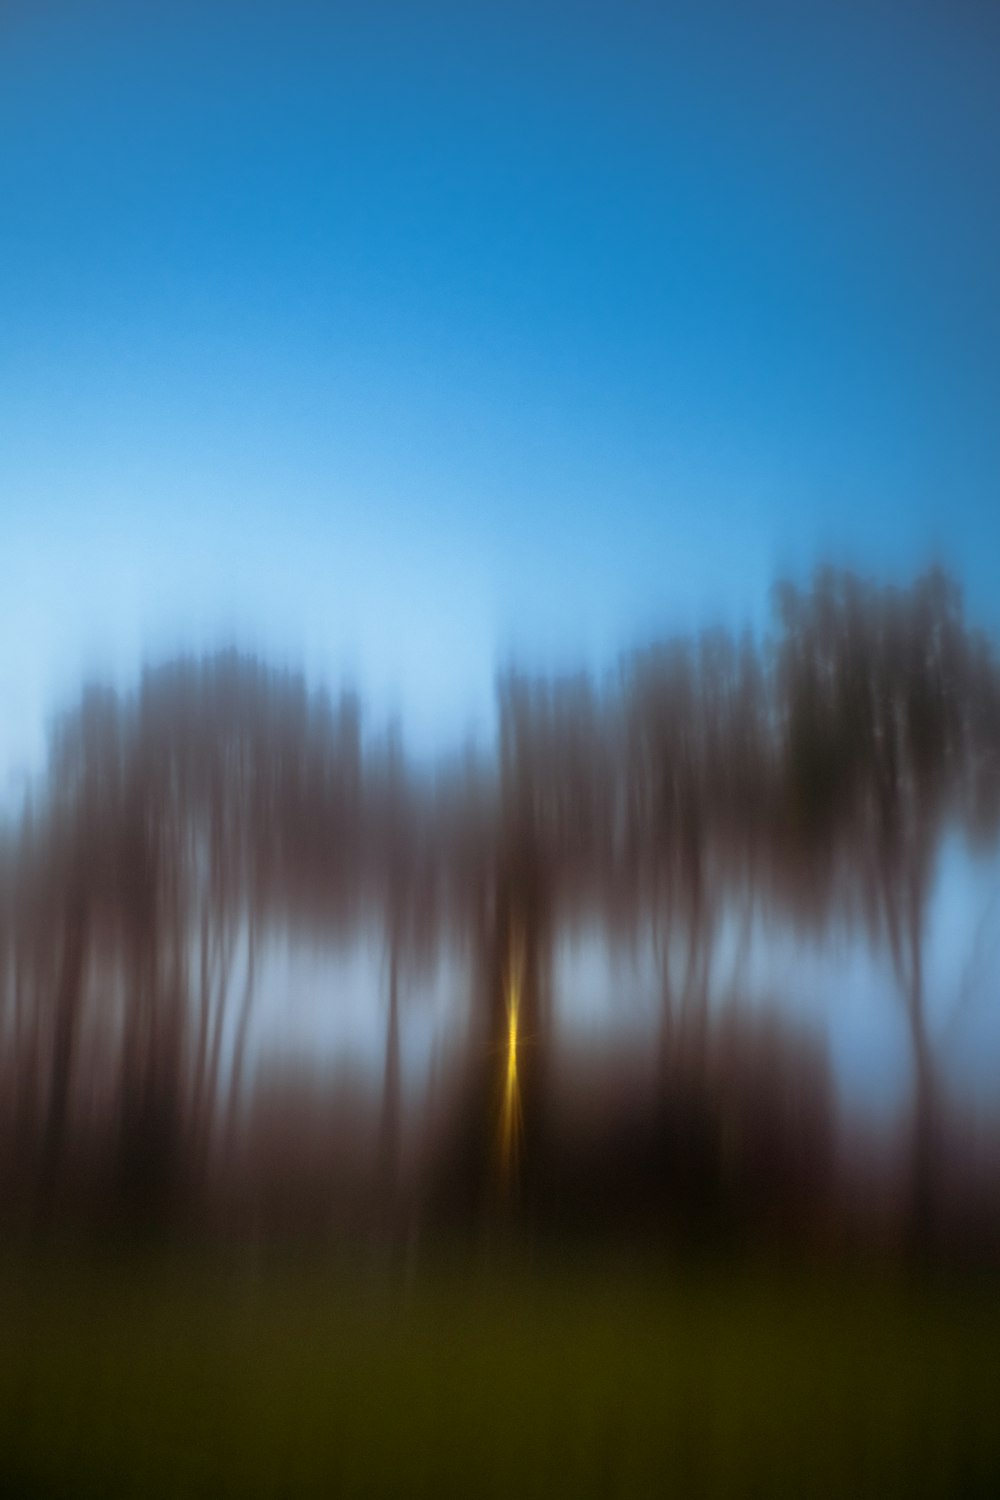 a blurry photo of trees and a street light